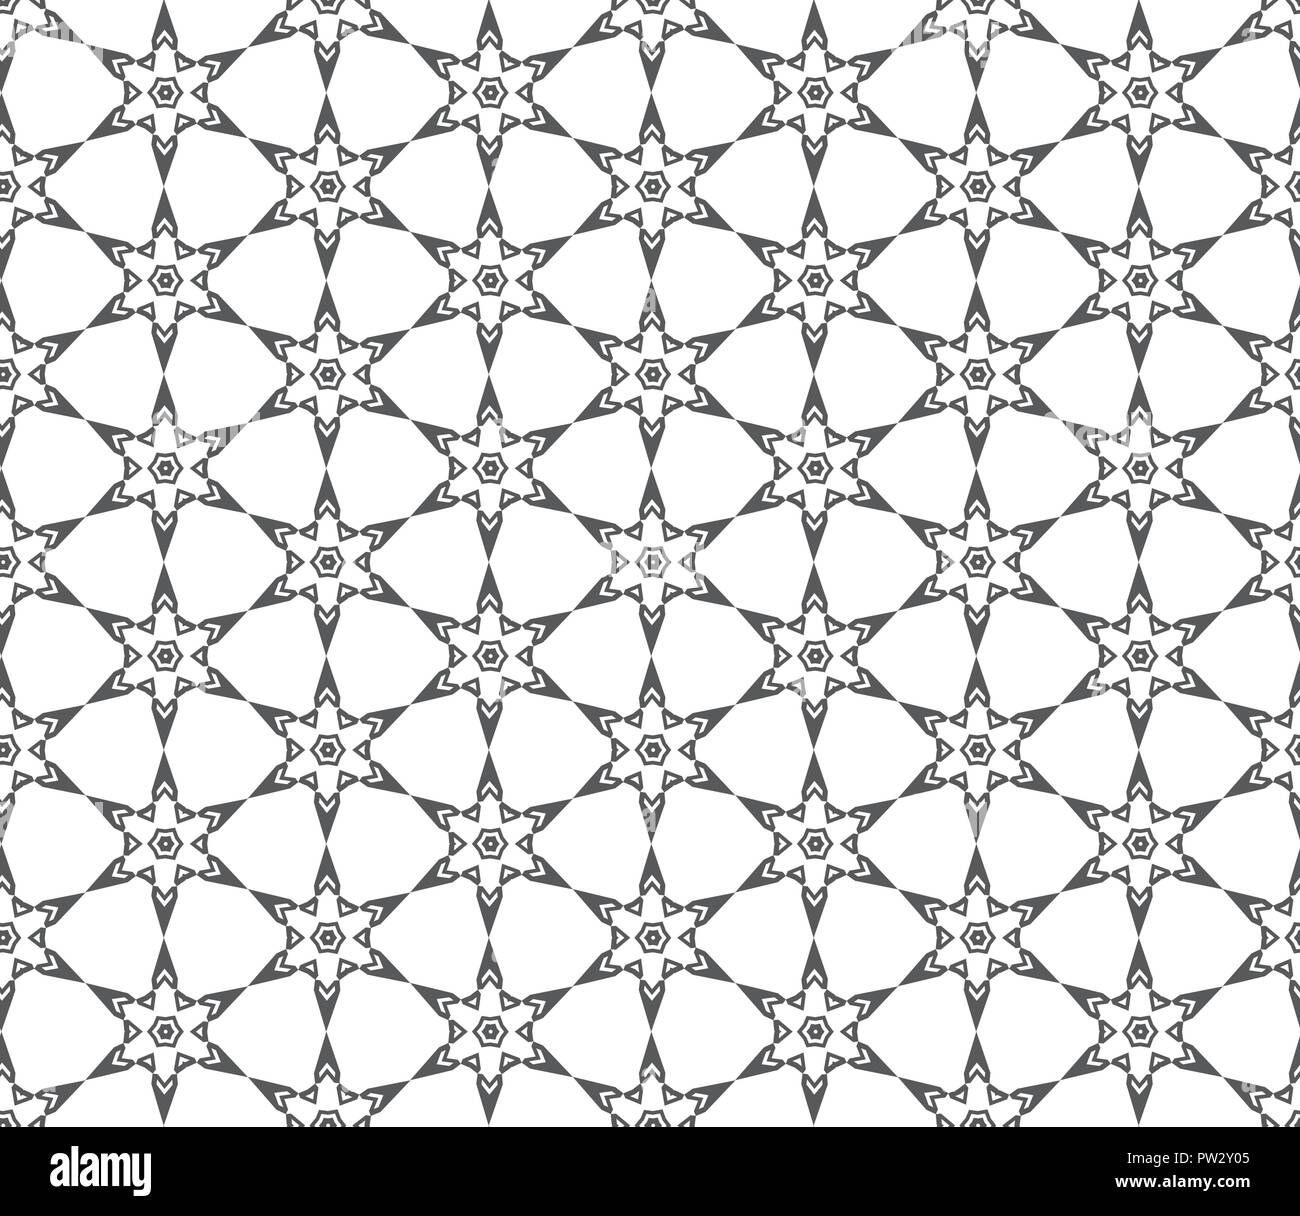 Abstract star geometric Seamless pattern . Repeating geometric Black and white texture. Stock Vector